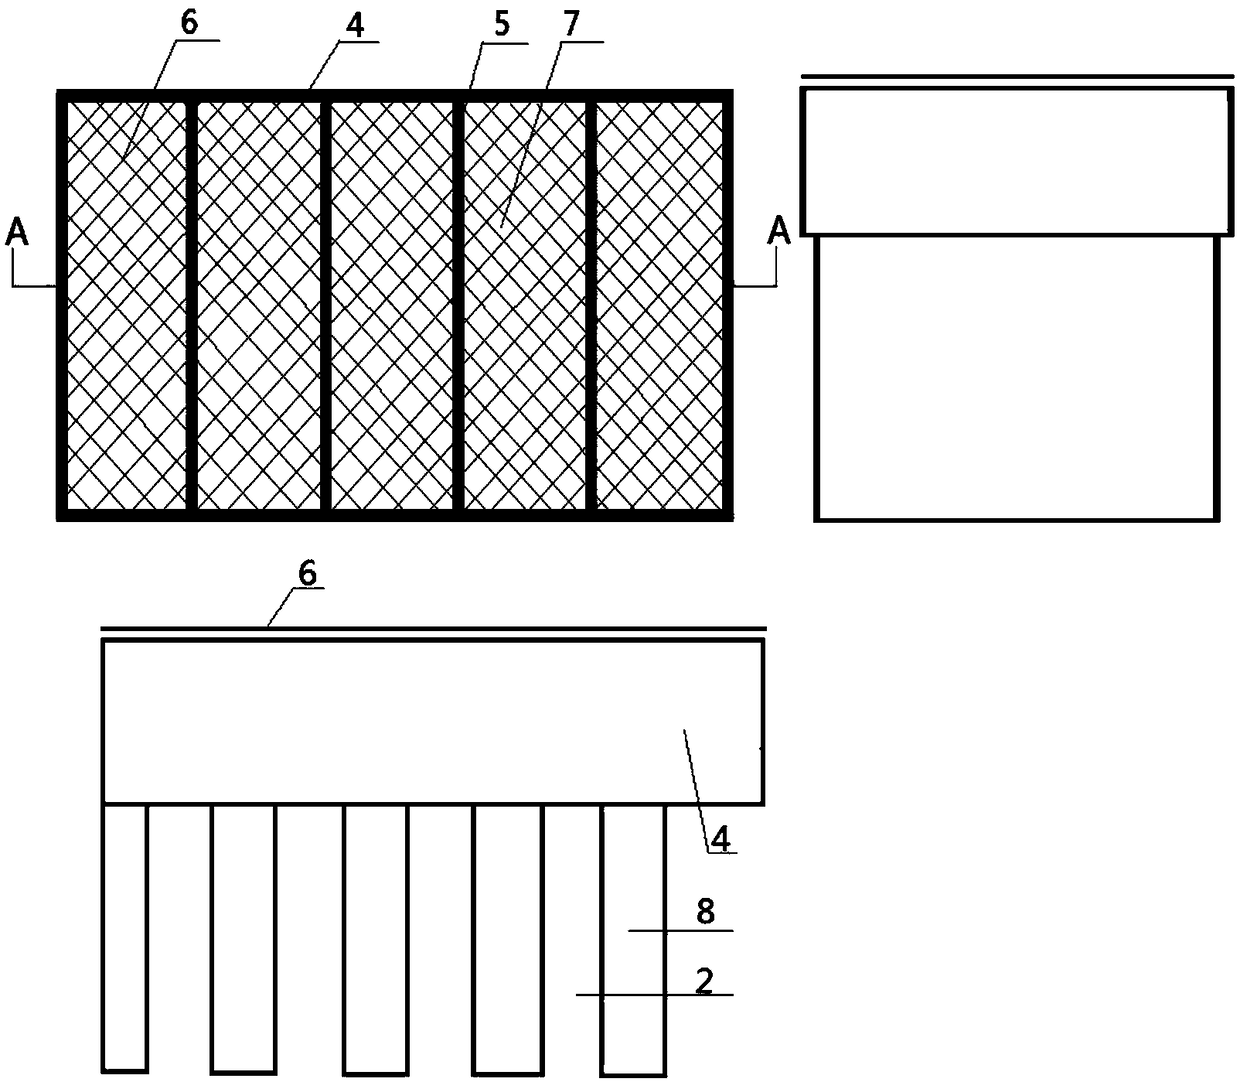 Permeable grate with screened drain holes with opening and closing doors on upper surface of permeable grate body